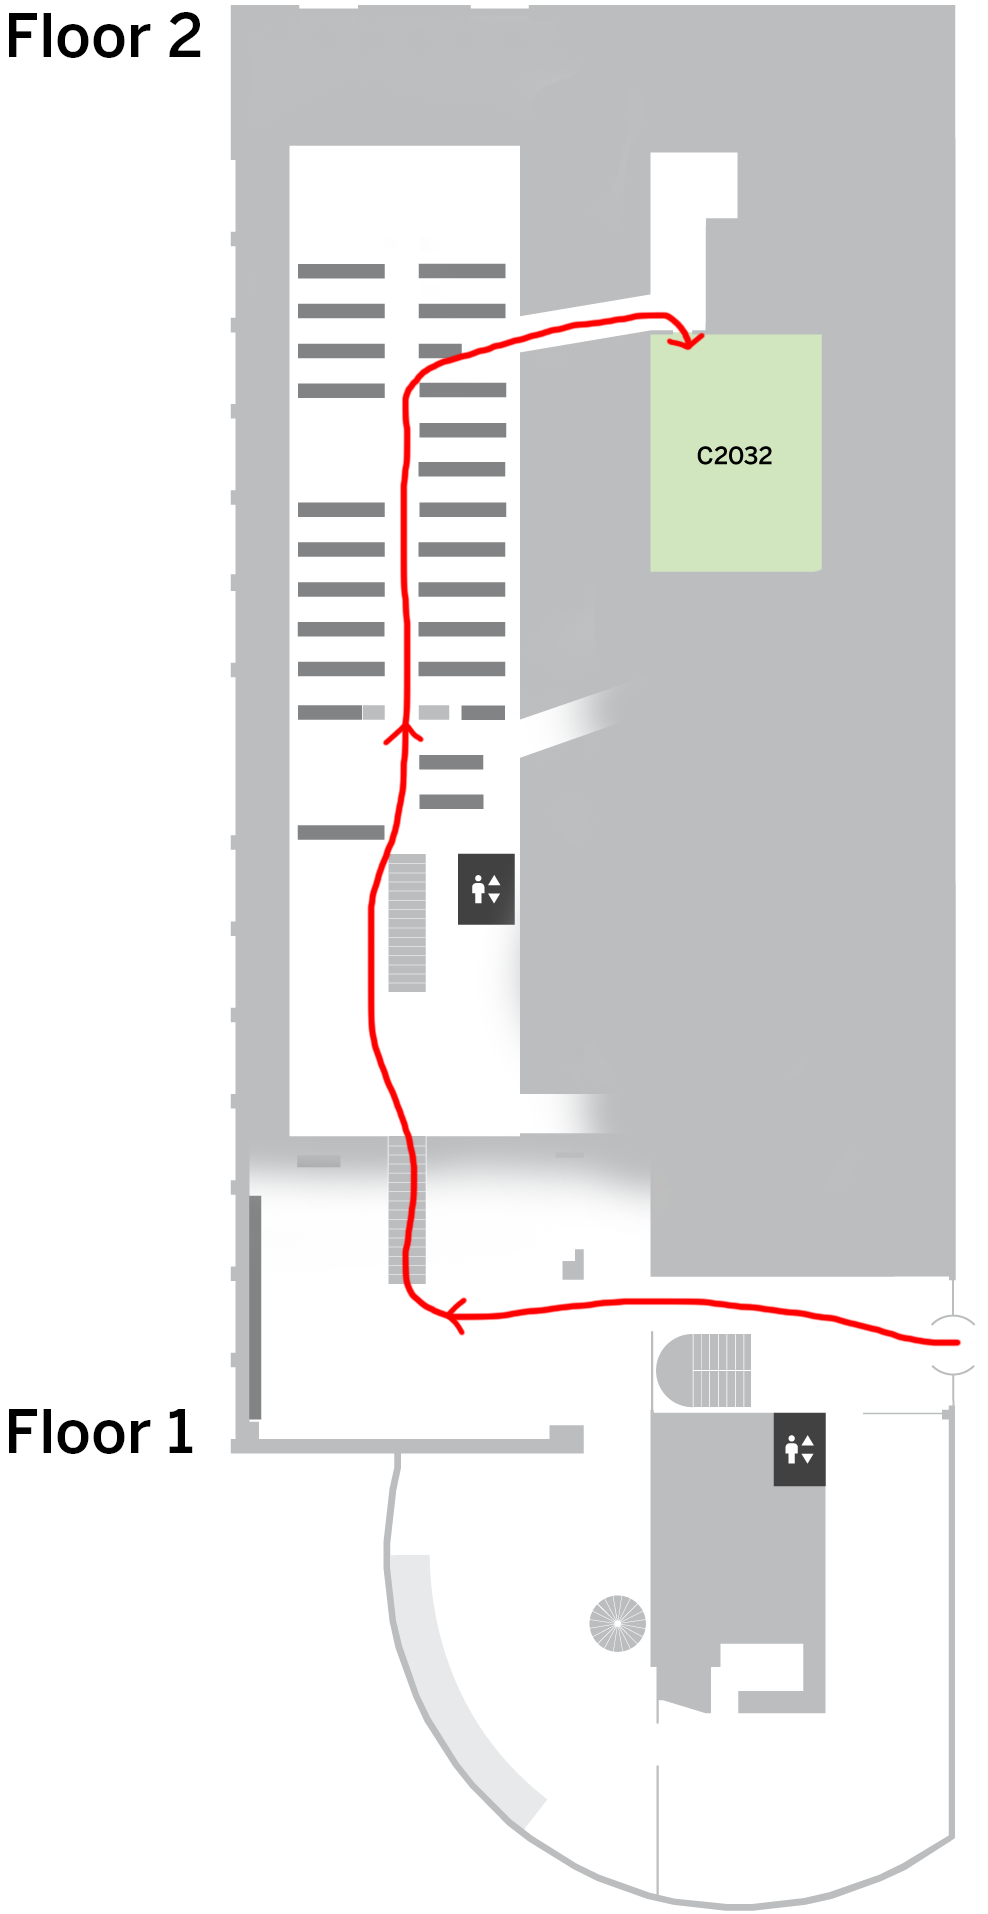 A map showing how to get from the entrance to room 2032 with a red line. The line enters at the entrance, goes into the library, and then turns right up the stairs to floor 2. After that, it follows the corridor between the bookshelves to the northern part of the library, where it turns right across the bridge.